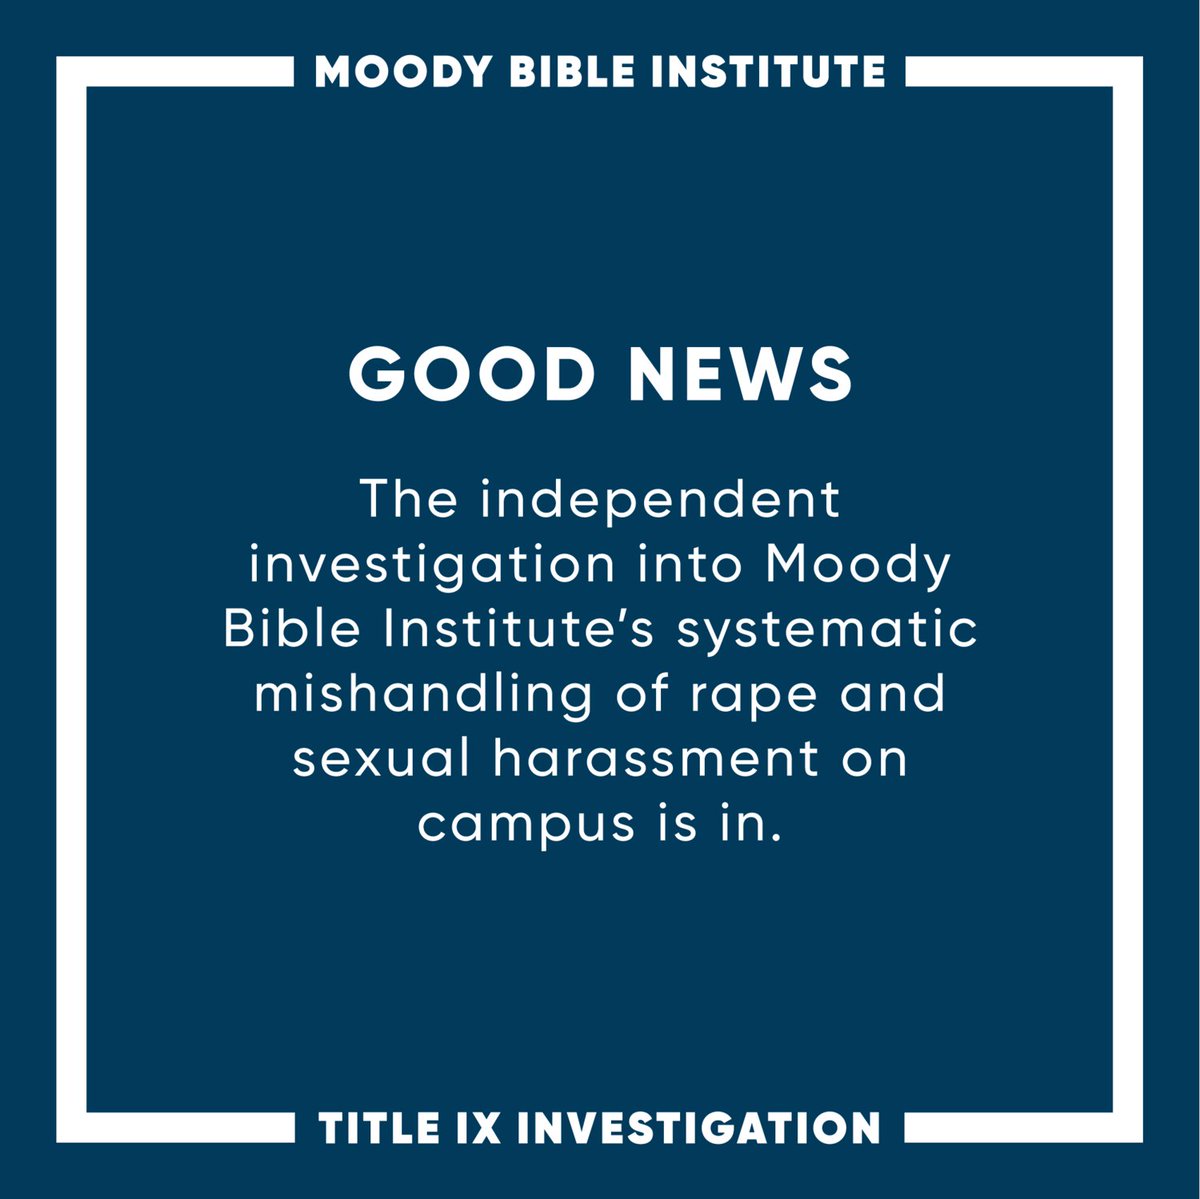 Here are the graphics for that which you can save and share in your own tweet  #ChurchToo  #MoodyToo  #BeBetterMoody